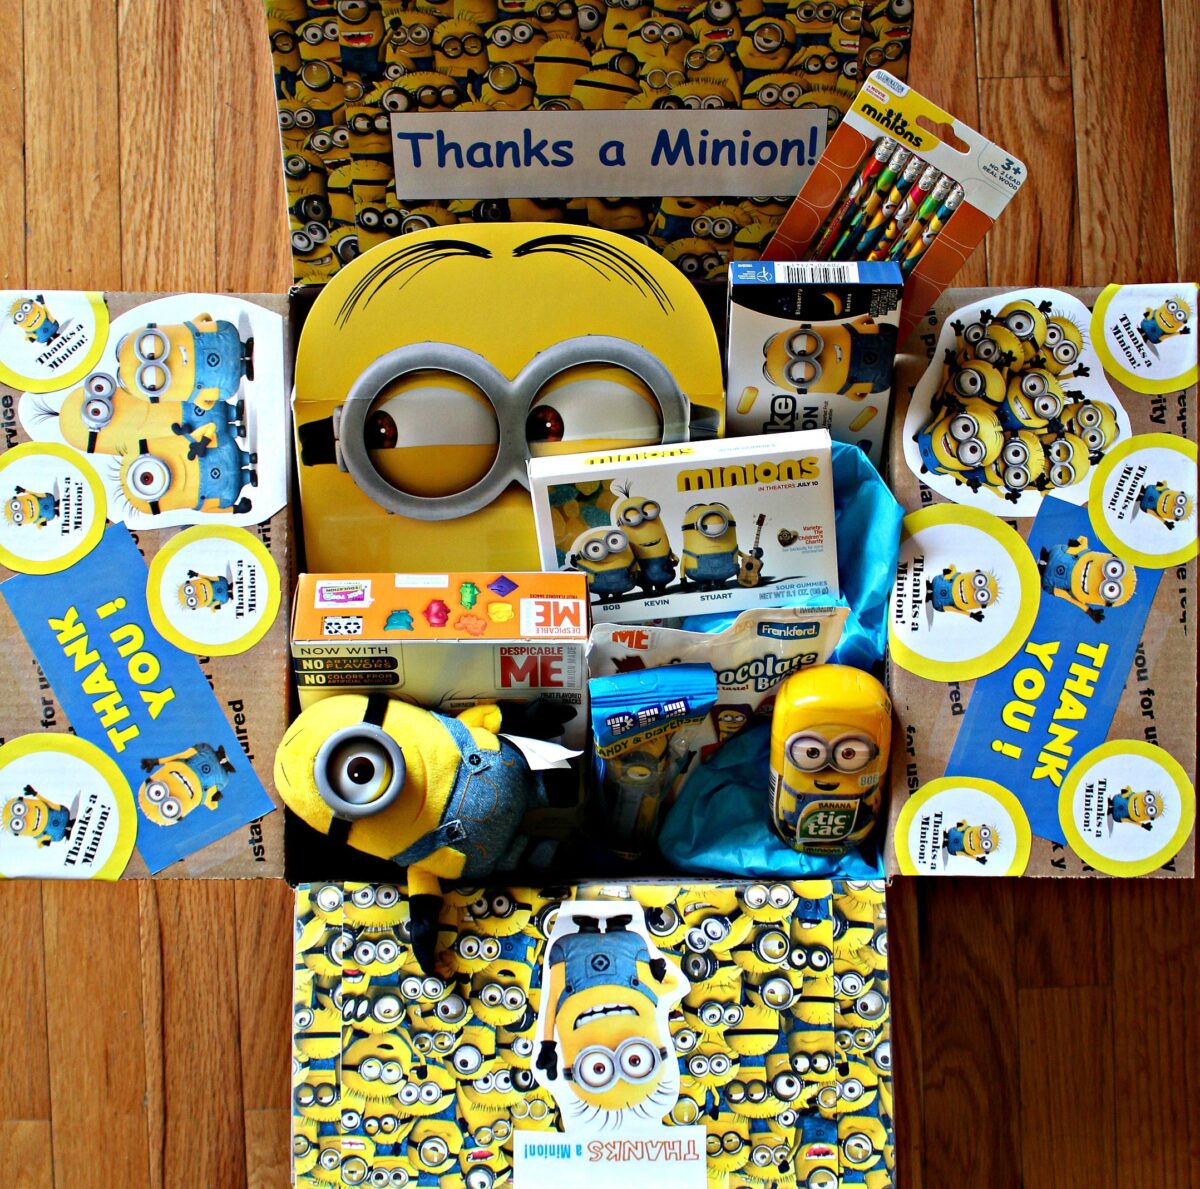 Minion Themed Care Package decorated and filled.